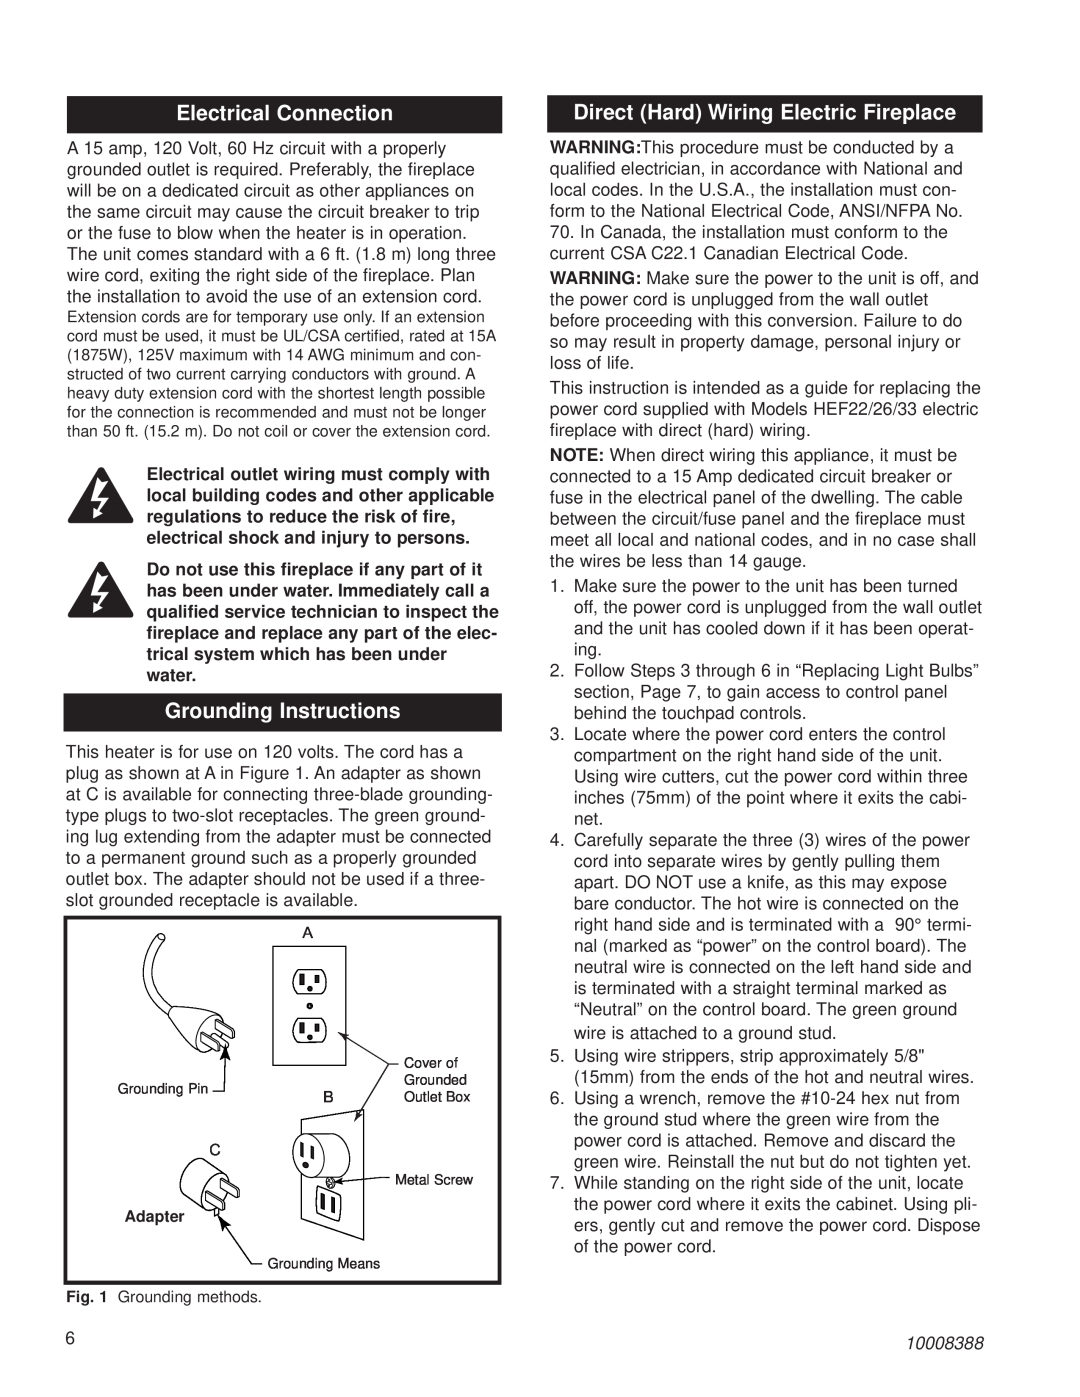 CFM Corporation HEF22 Electrical Connection, Grounding Instructions, Direct Hard Wiring Electric Fireplace, 10008388 